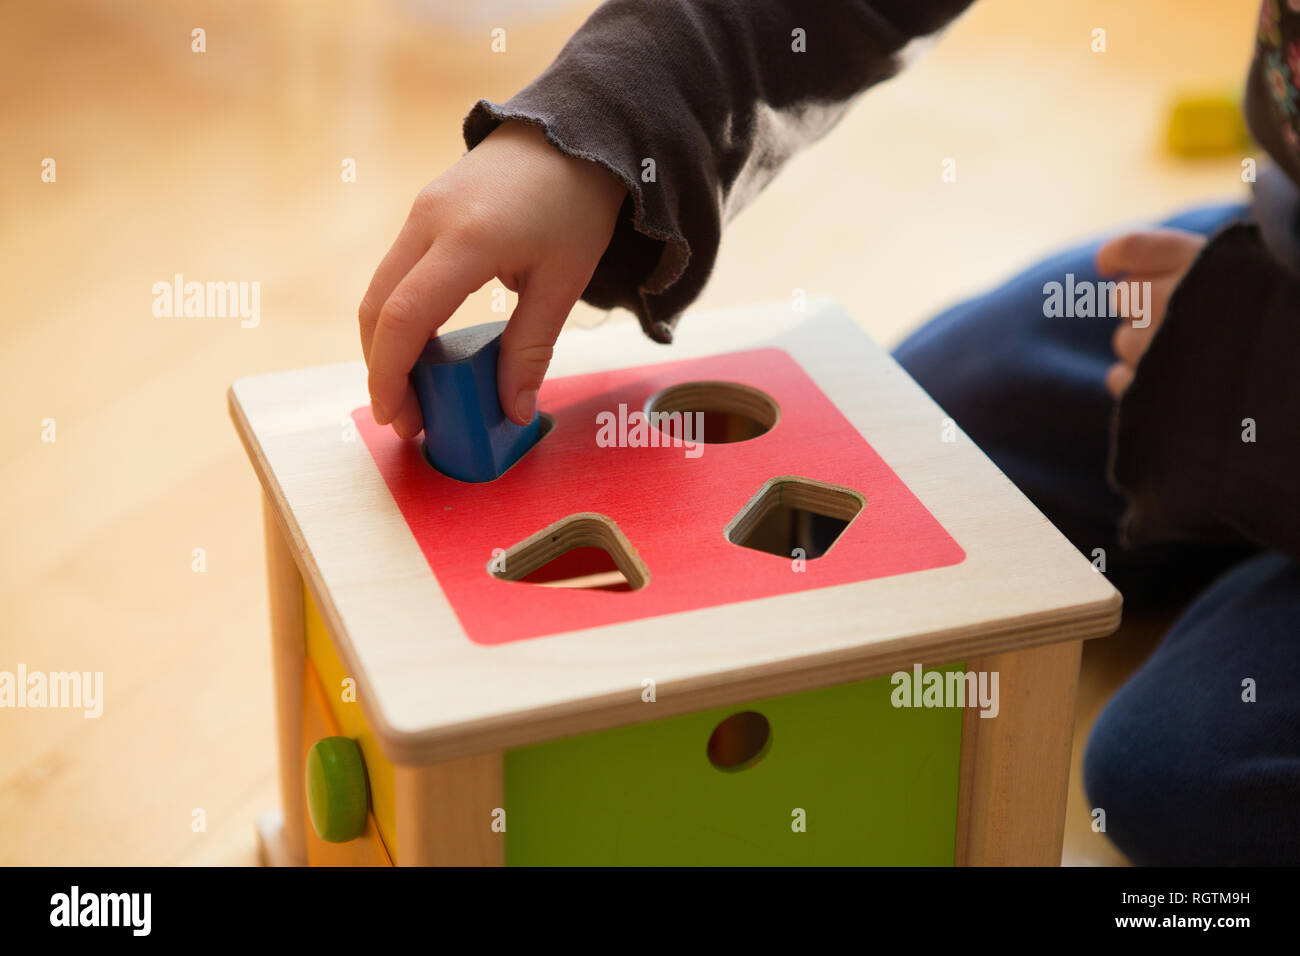 Child playing with wooden bricks in diffrent shapes and colors trying to put them into the proper hole Stock Photo